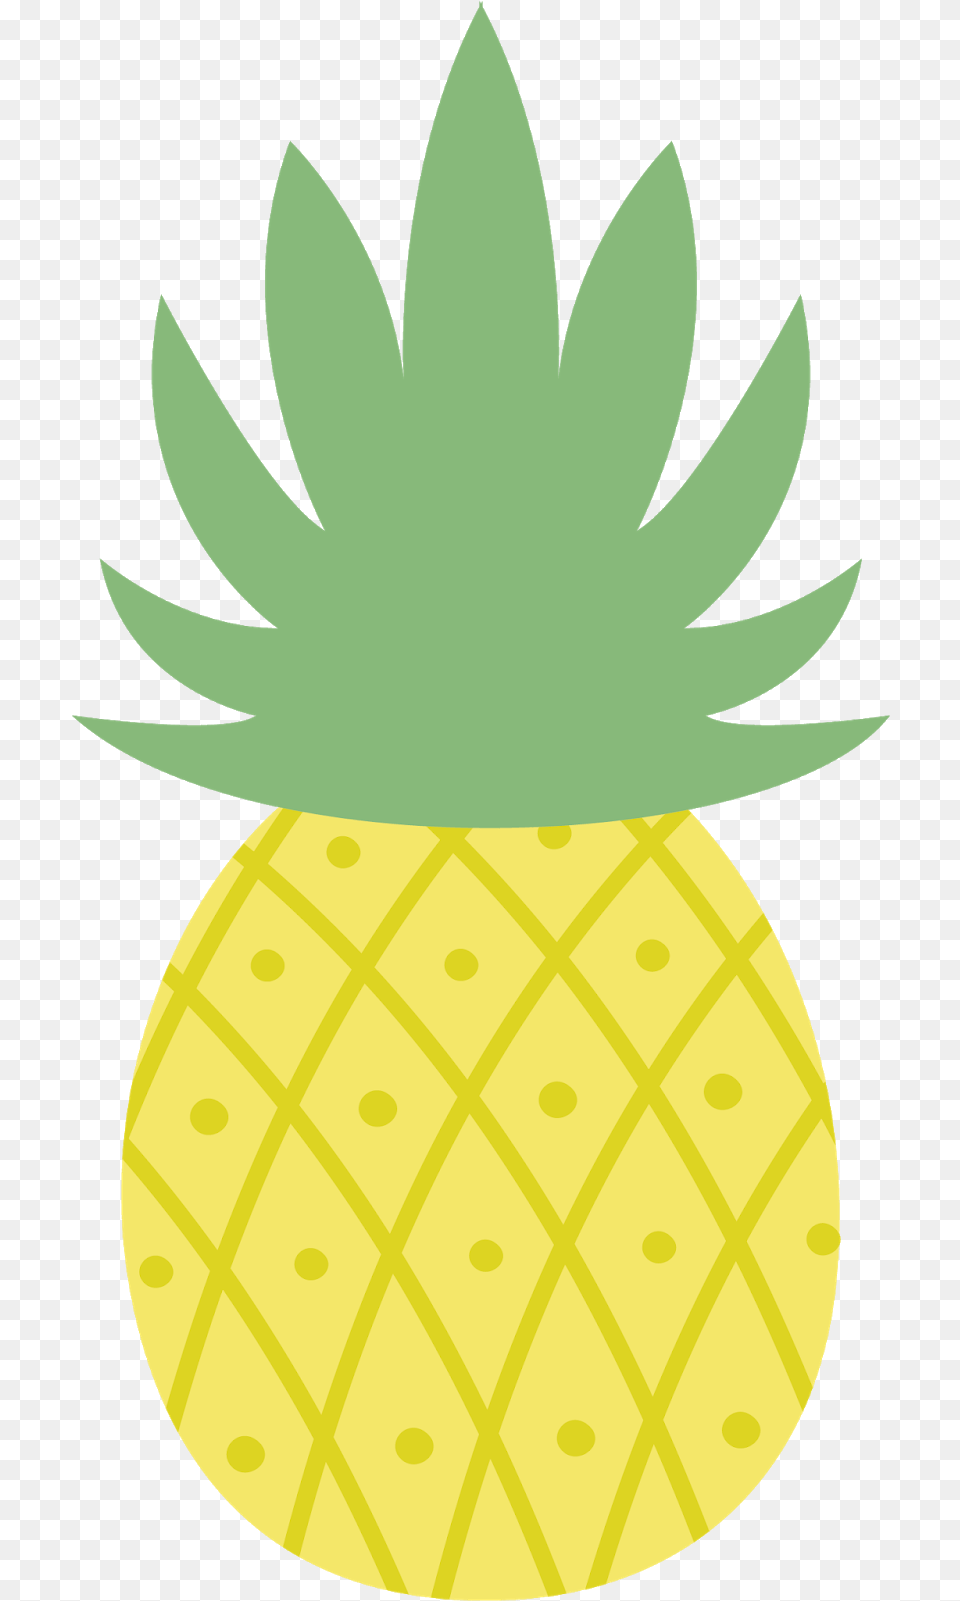 Pineapple Cartoon Clipart Cartoon Background Pineapple Food, Fruit, Plant, Produce Free Transparent Png